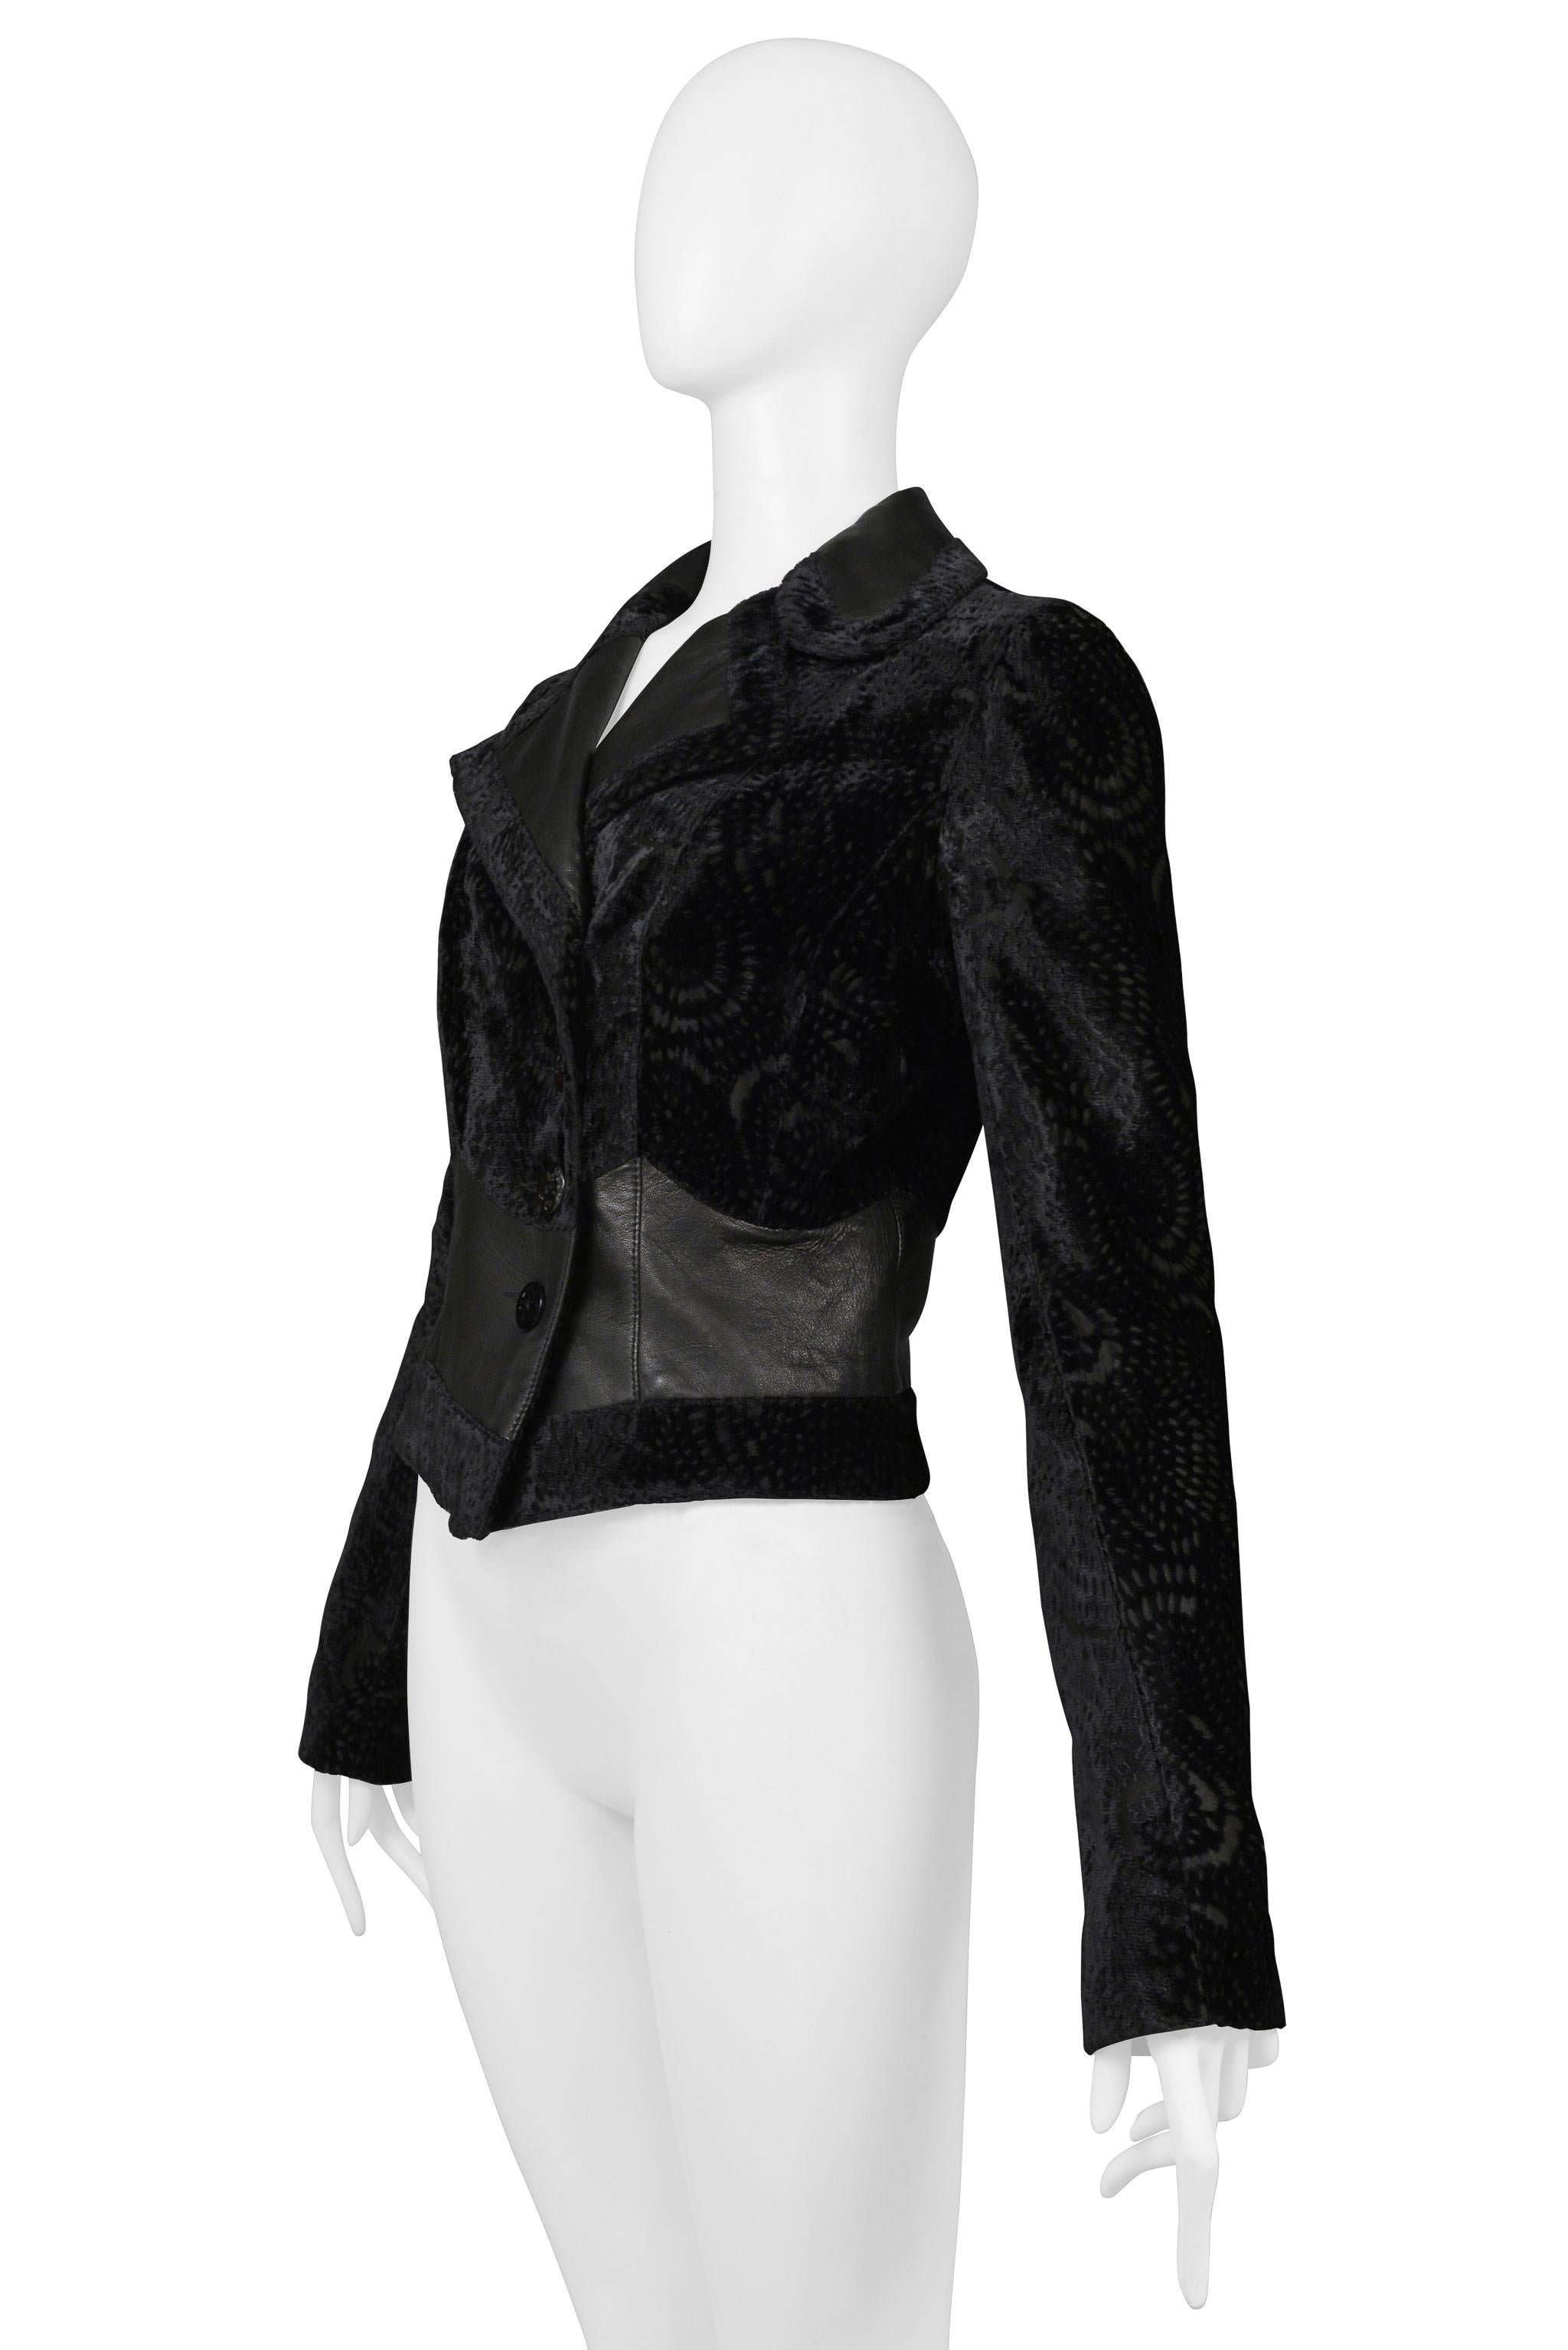 Women's John Galliano Black Floral Silk Velvet Jacket With Leather Insets 2005 For Sale